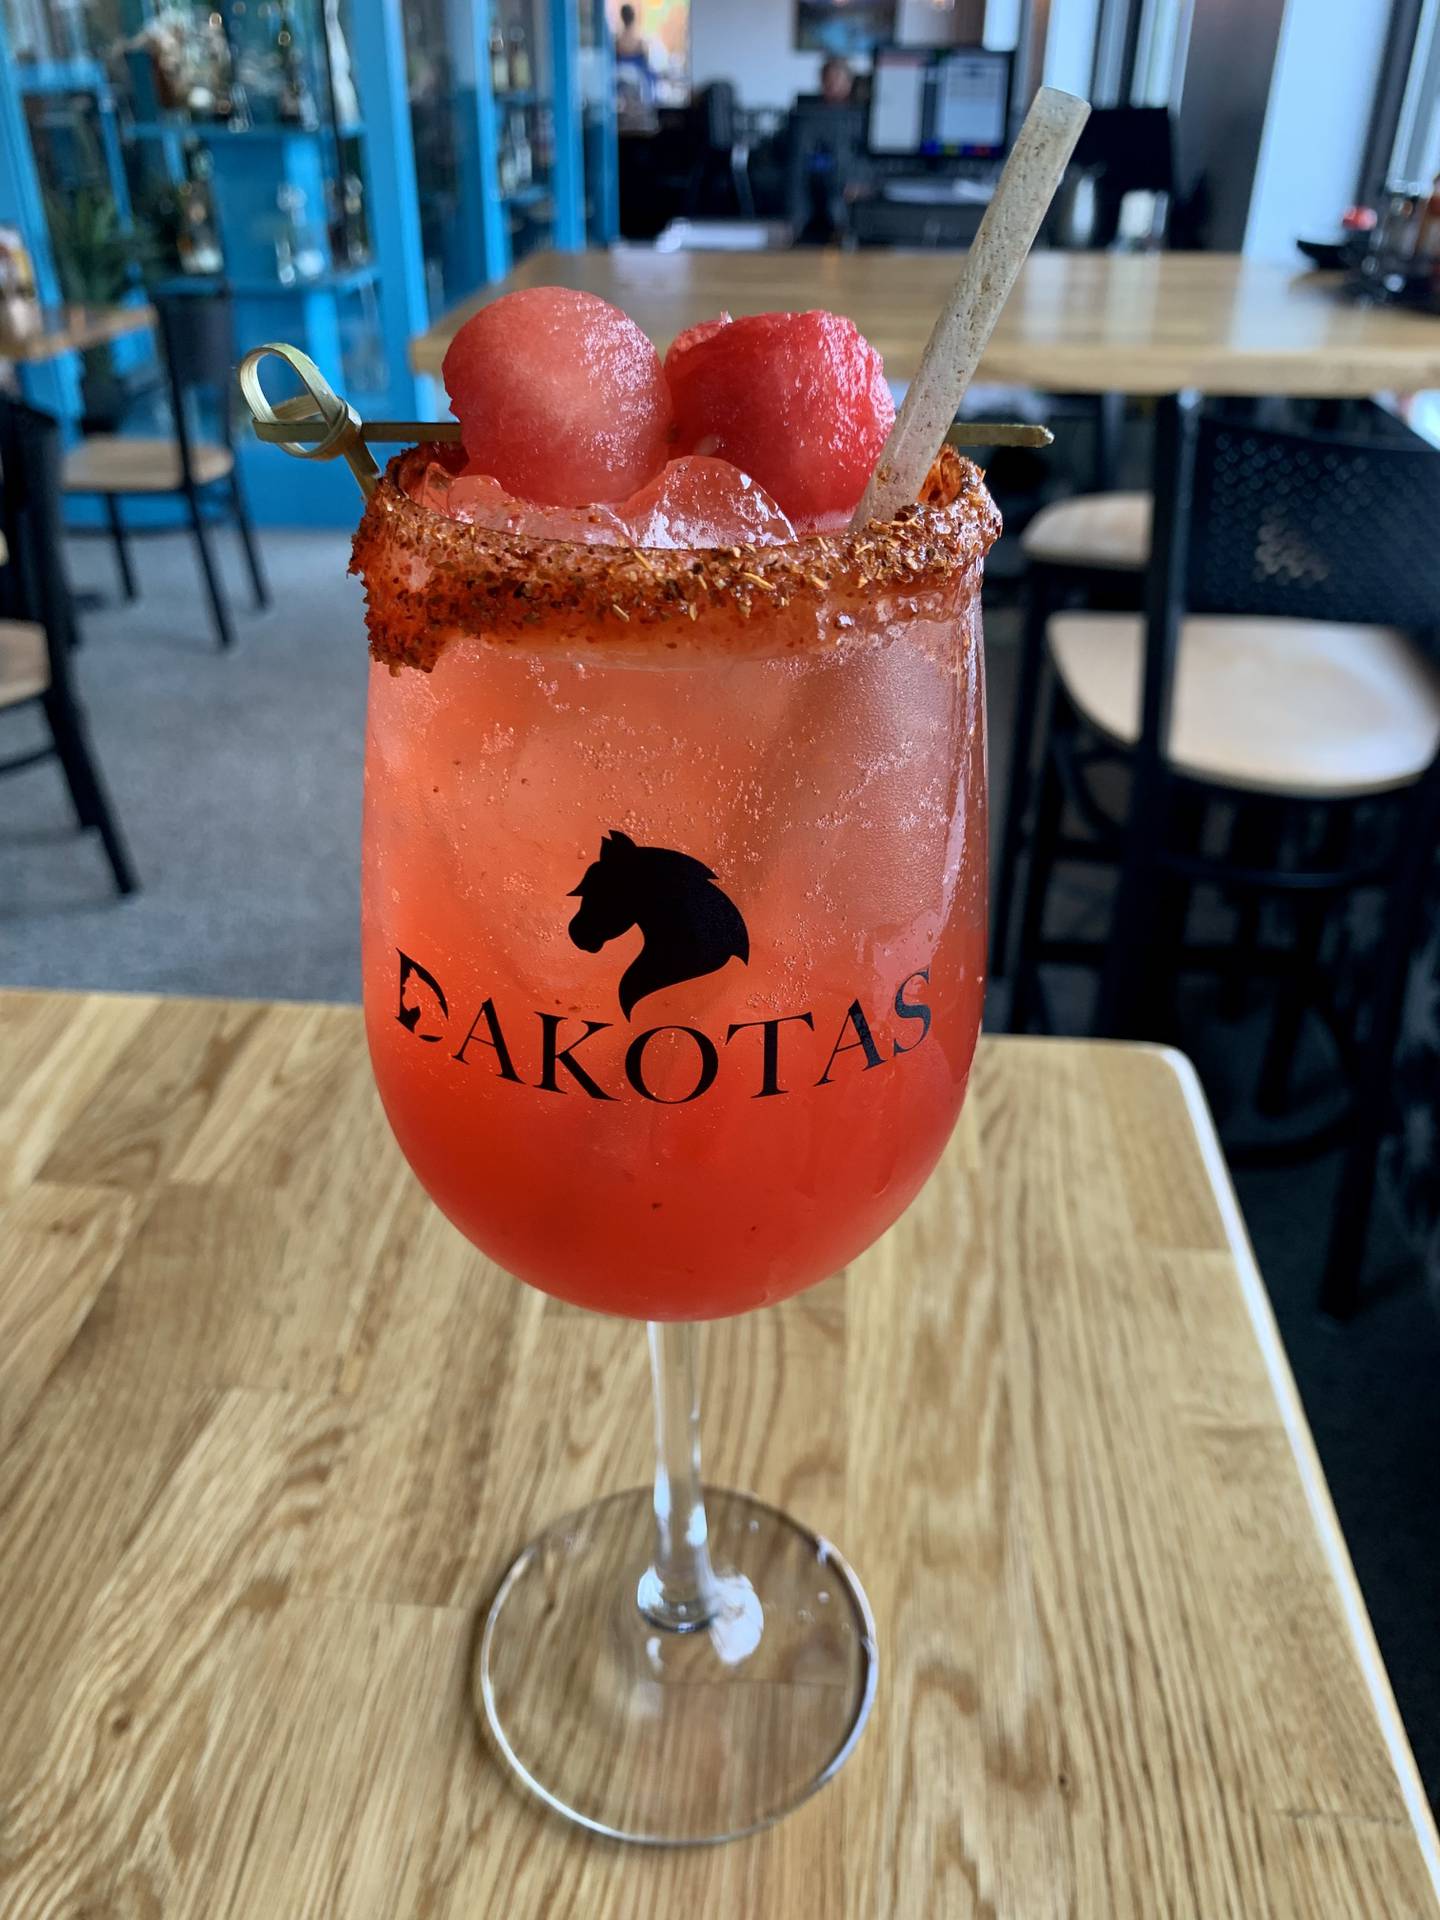 Watermelon Sugar High is like a watermelon margarita with a kick. The tequila based cocktail is topped with Celcius energy drink and rimmed with spicy chamoy.